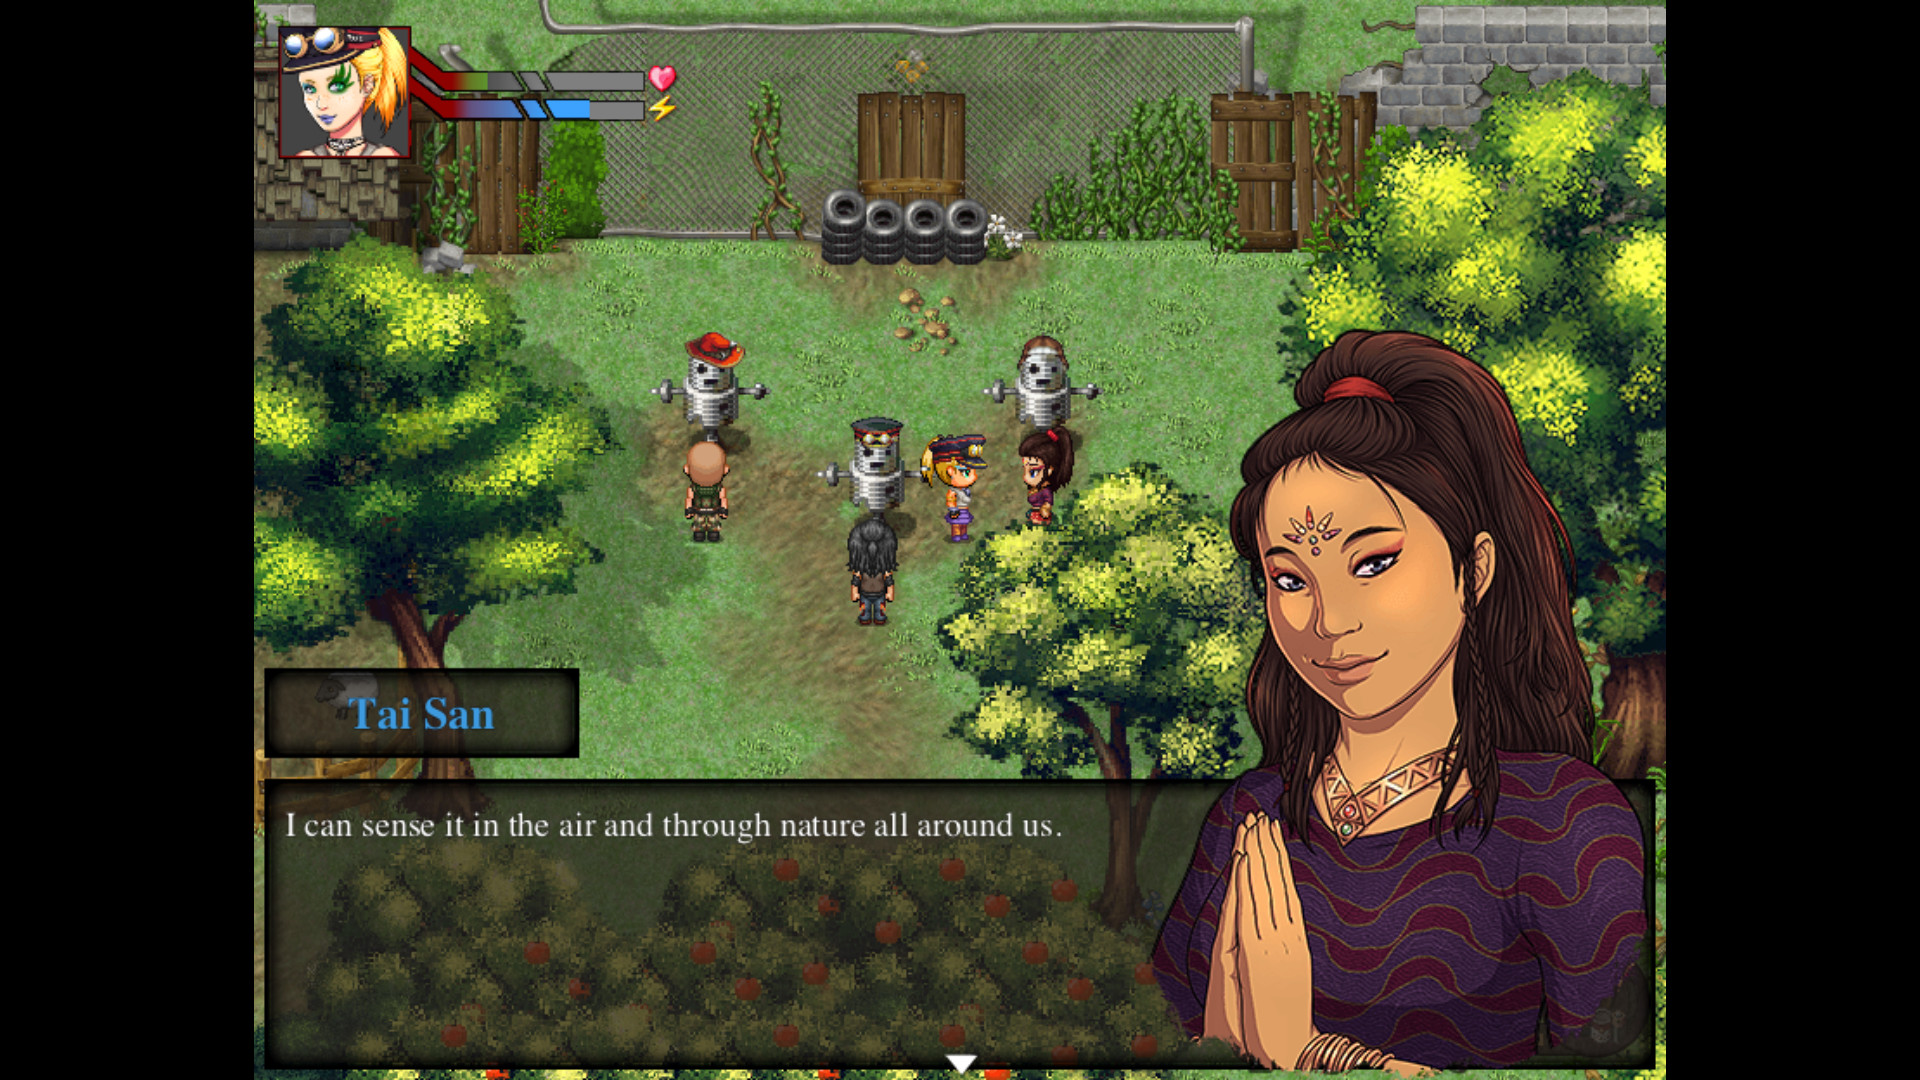 Download tribals io android on PC